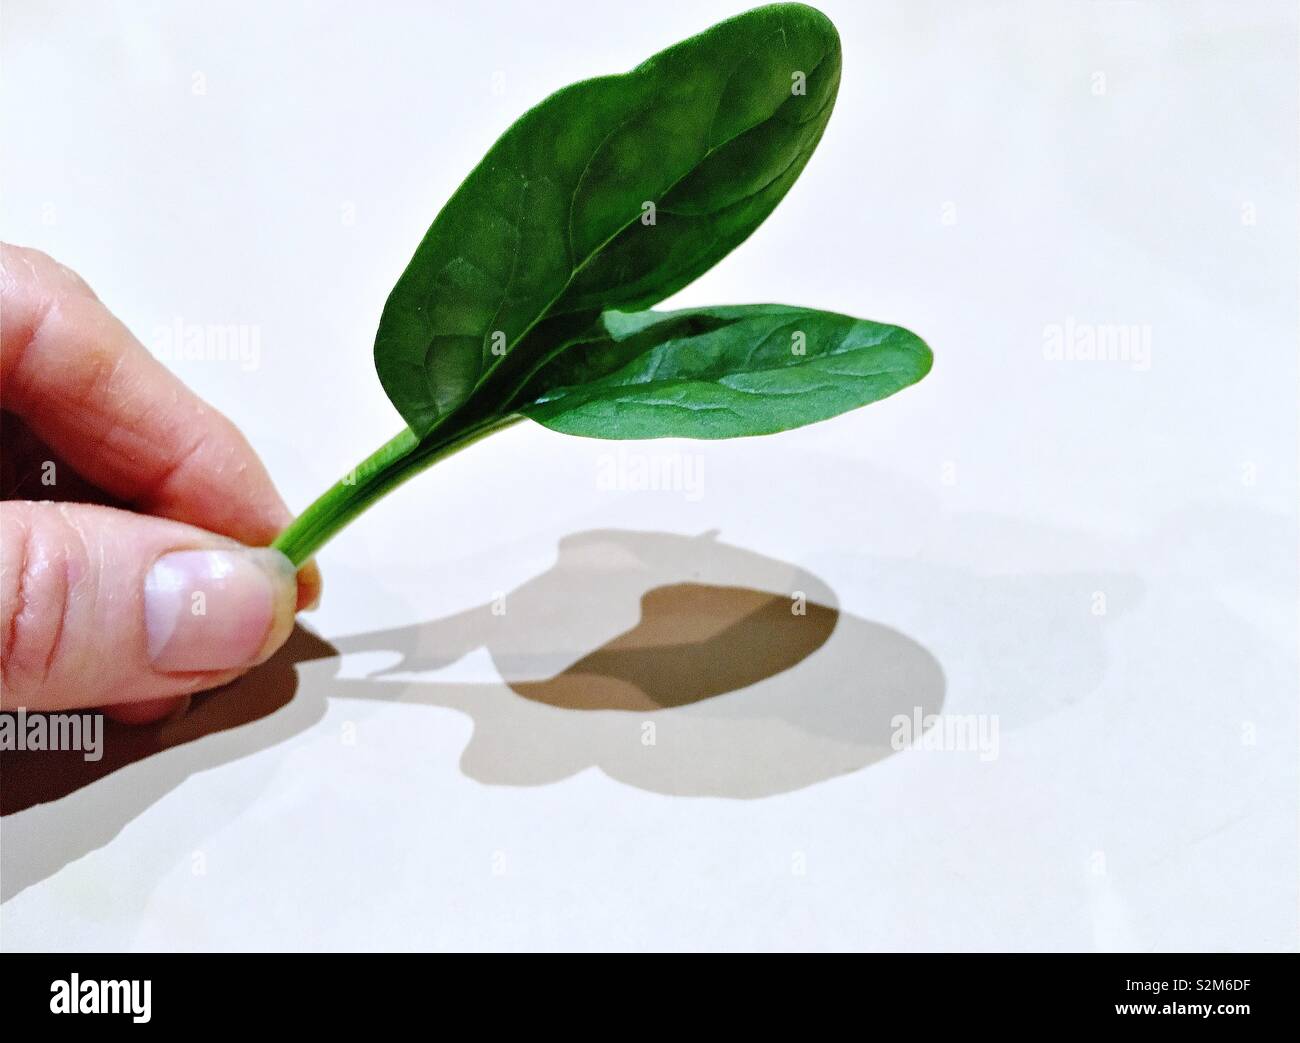 A Caucasian female thumb and finger holding onto a baby spinach leaf stem.  White background. Stock Photo